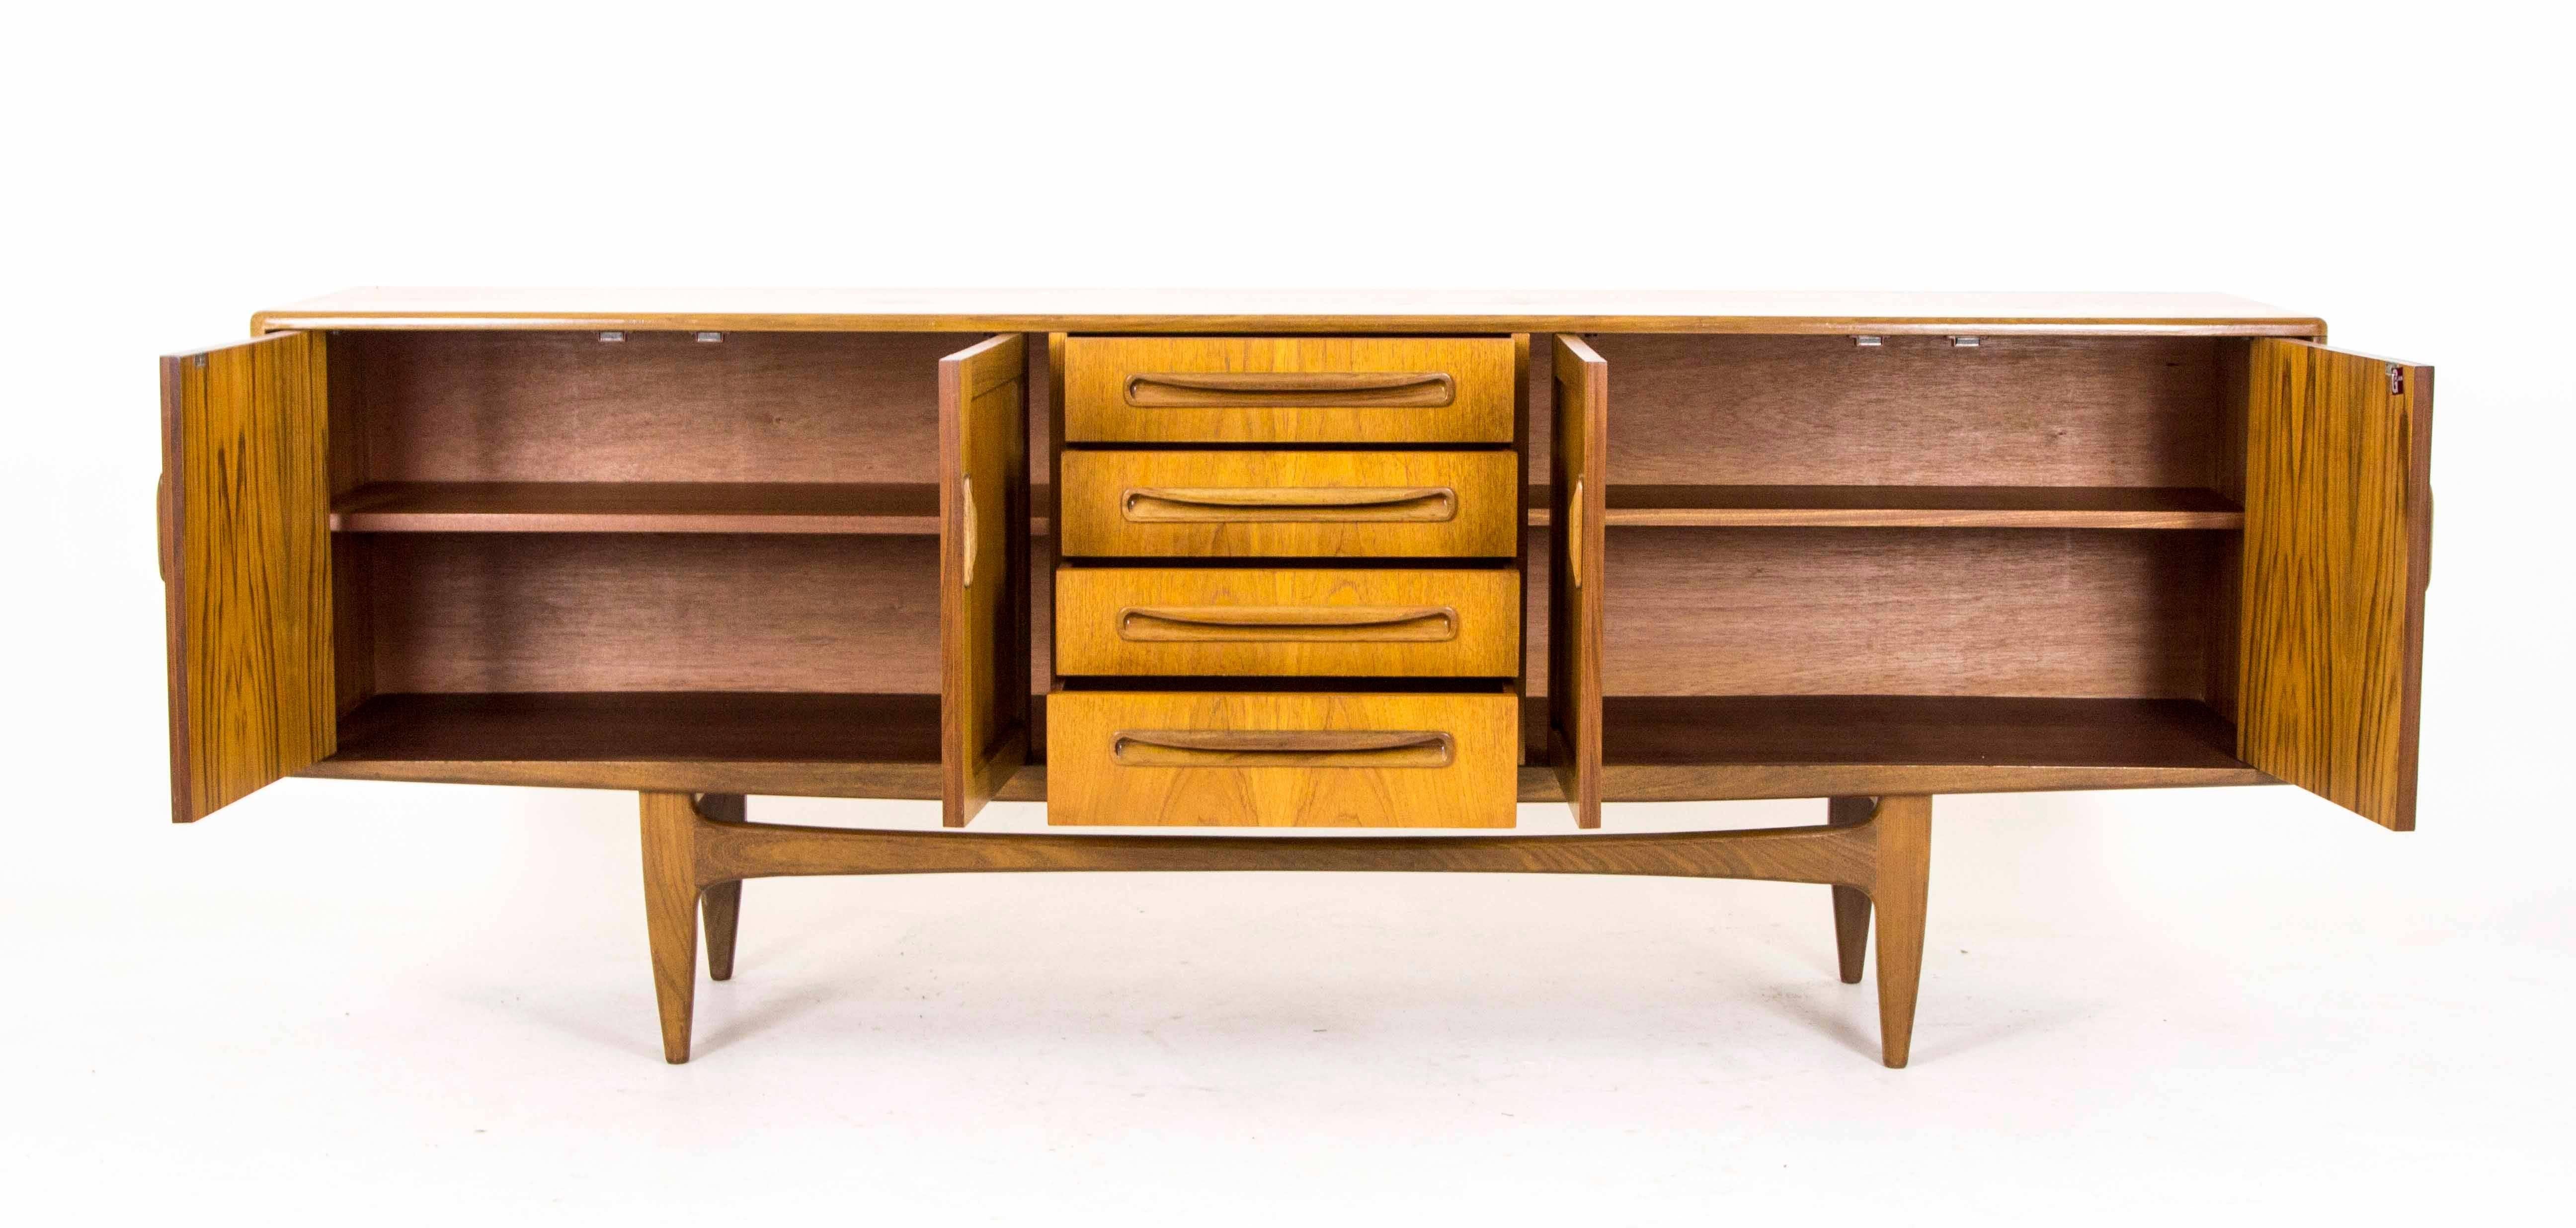 England
1960
All original
Designed by Victor Wilkens for GPlan
Part of the Fresco Range
Four central drawers
Flanked by two double door cupboards
Top drawer with Felt and Sections for Cutlery
Ending on shaped base
Very good